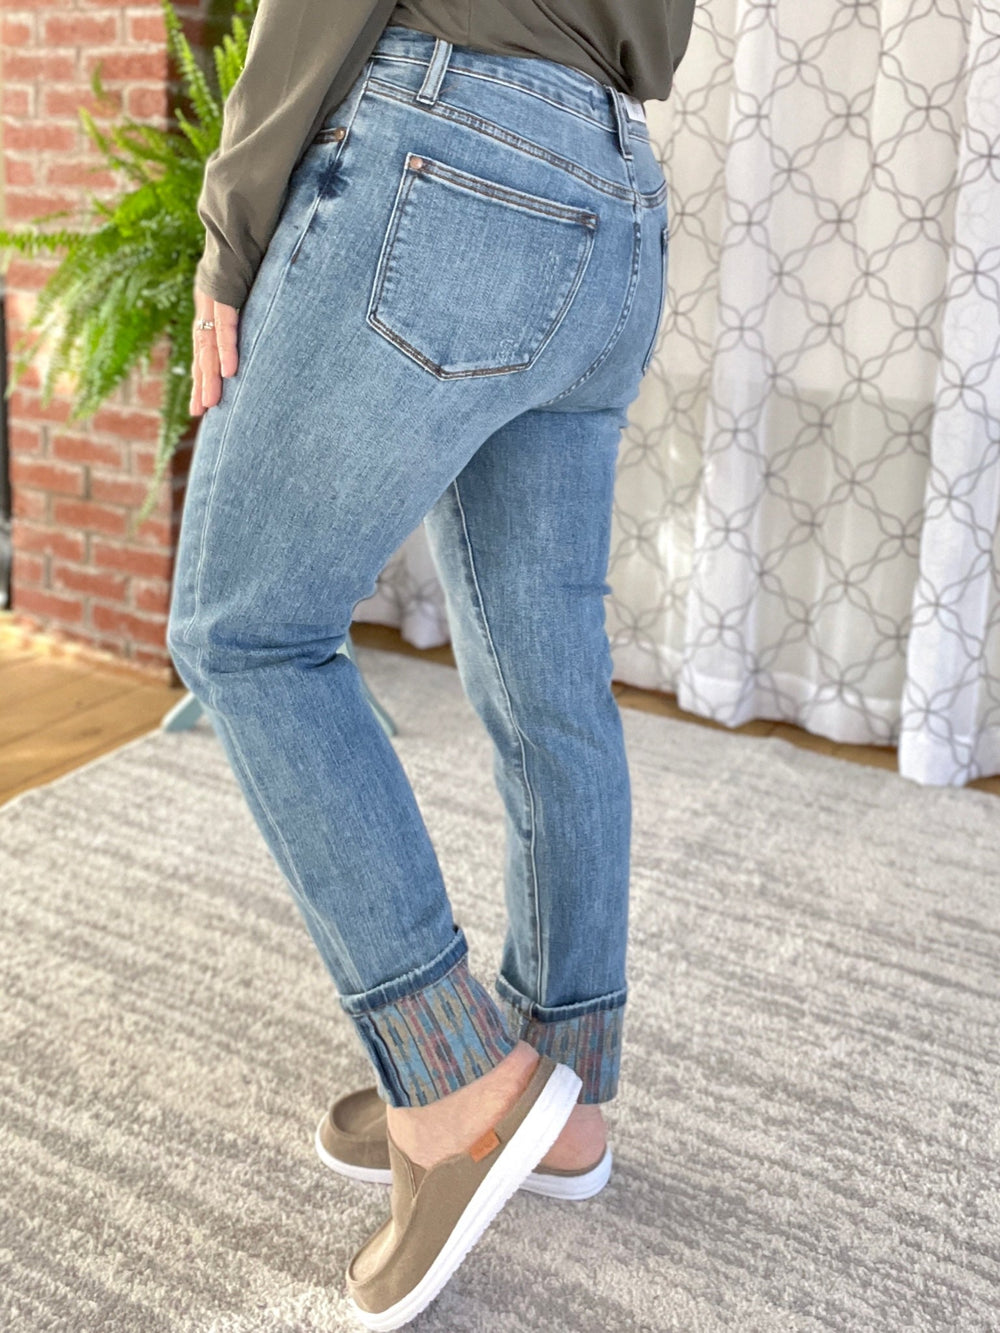 Southwestern Style Judy Blue Jeans-Judy Blue-Inspired by Justeen-Women's Clothing Boutique in Chicago, Illinois